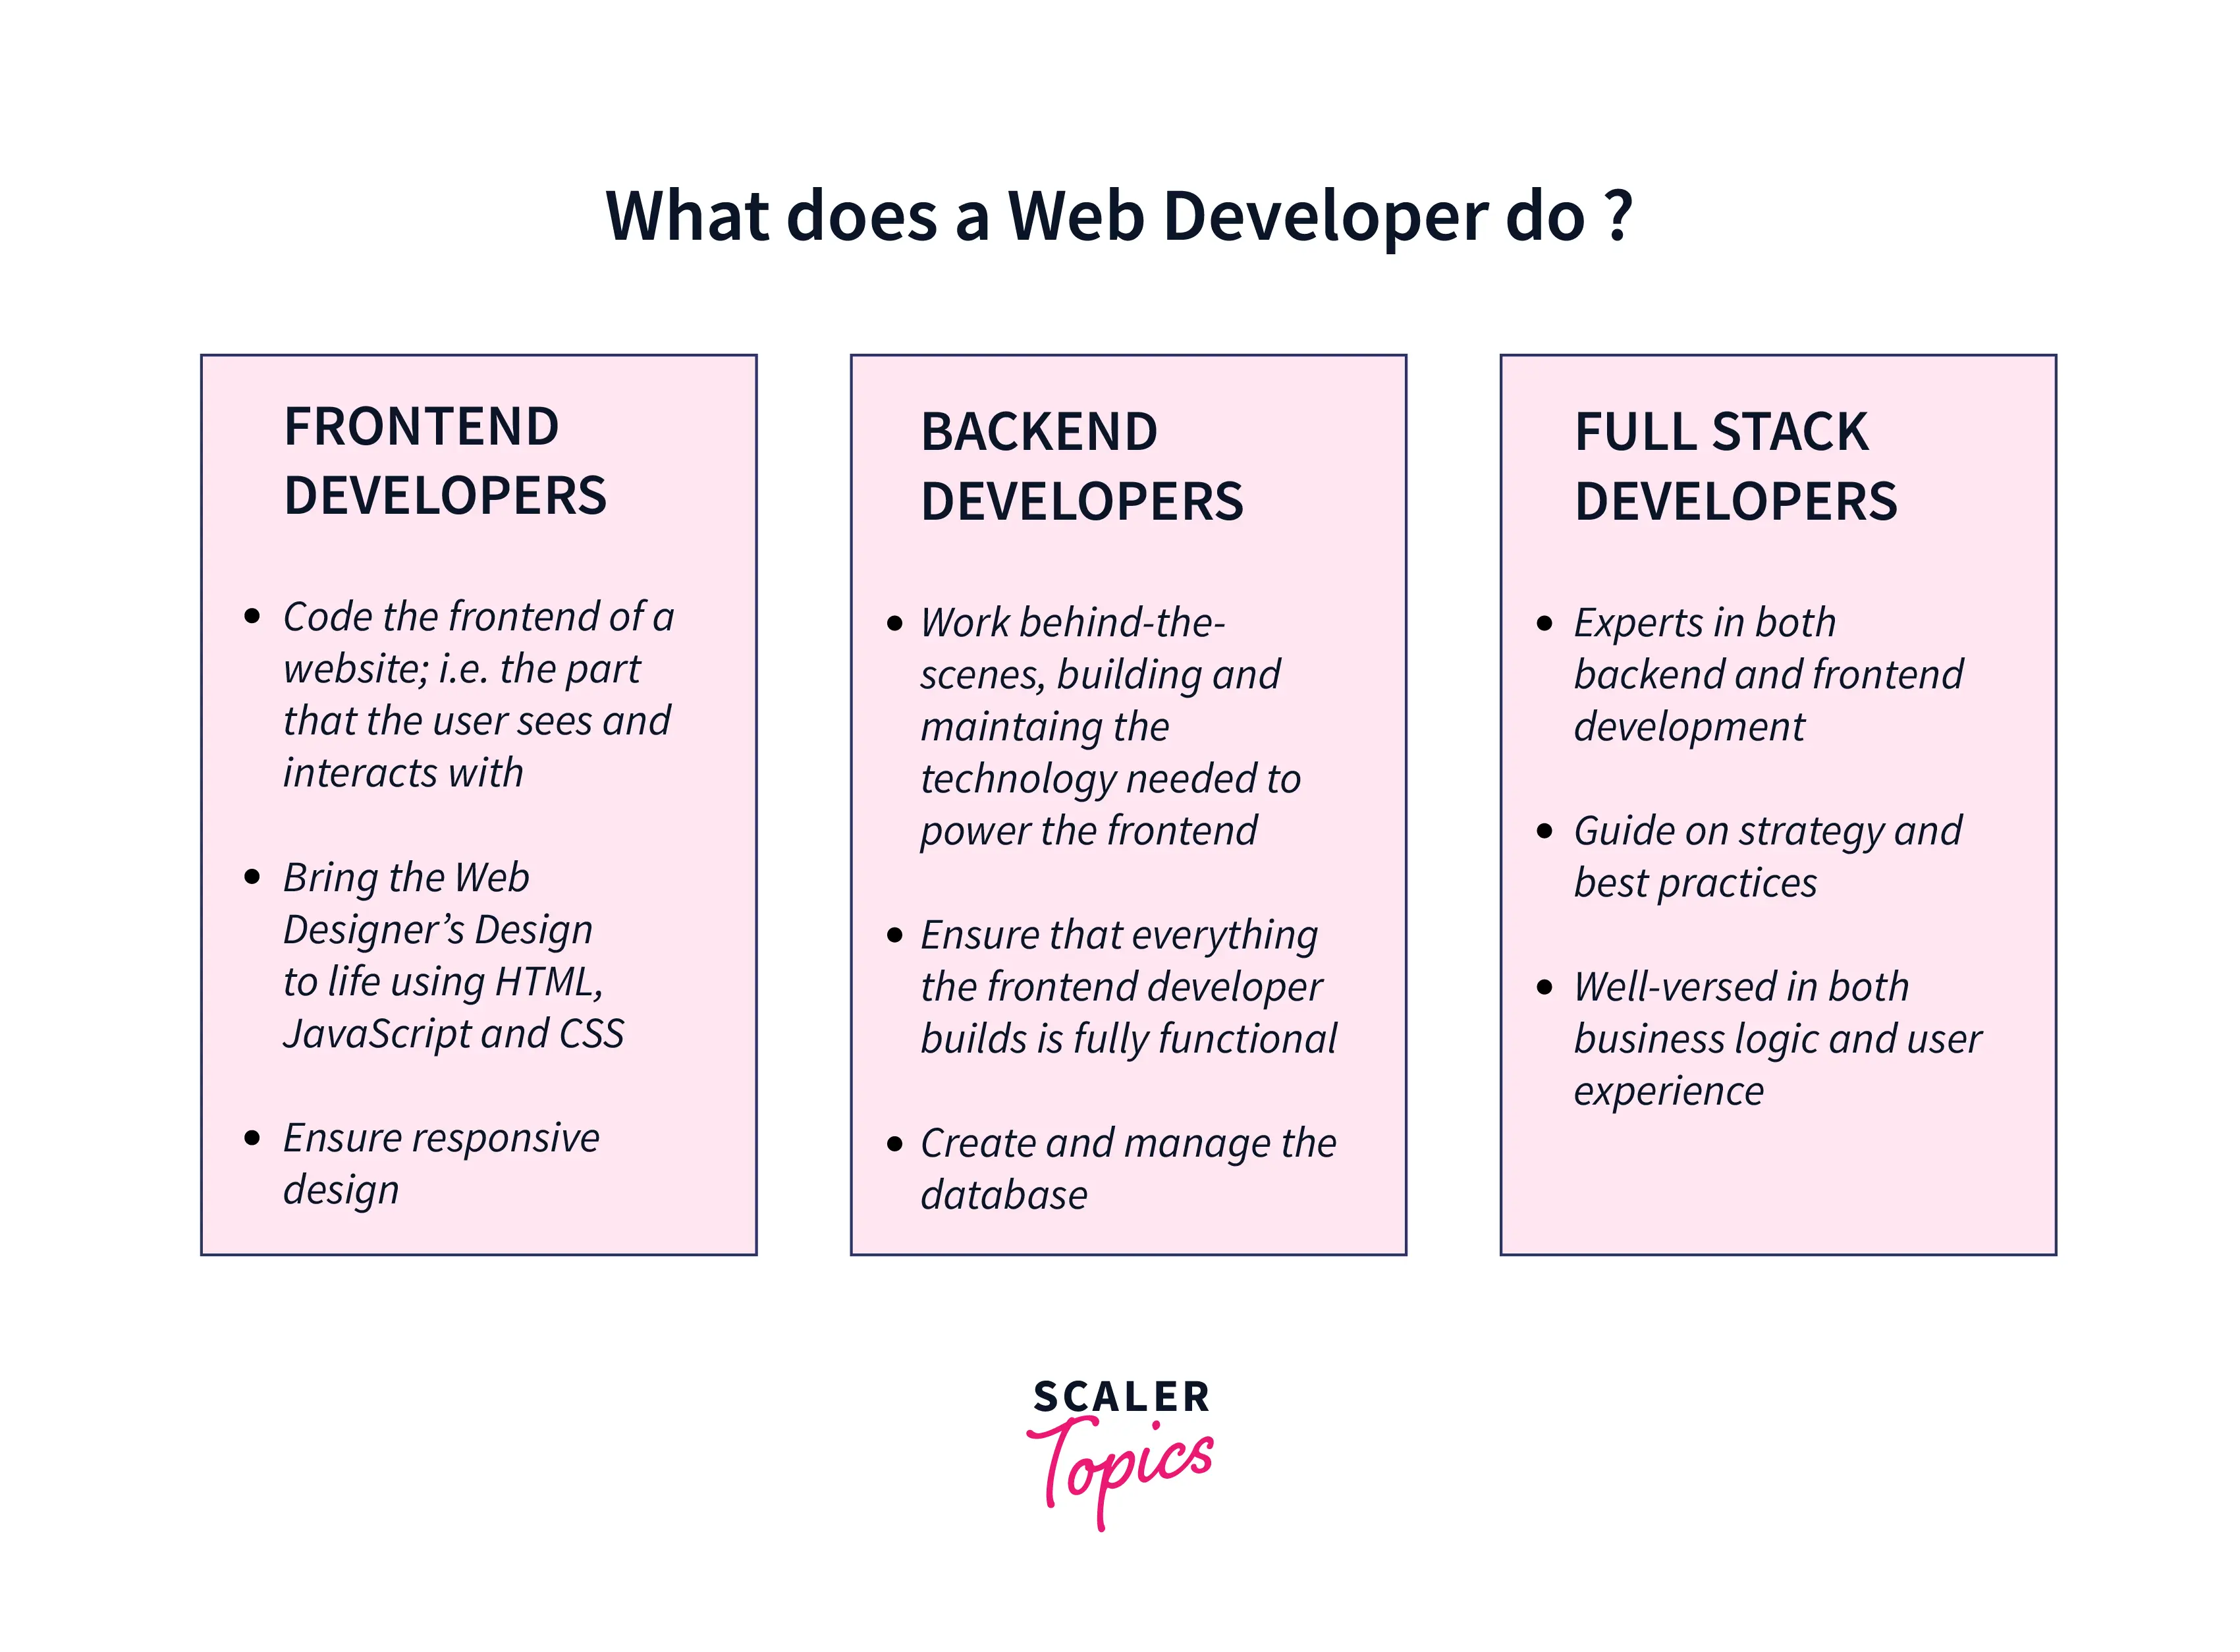 WHAT DOES A WEB DEVELOPER DO